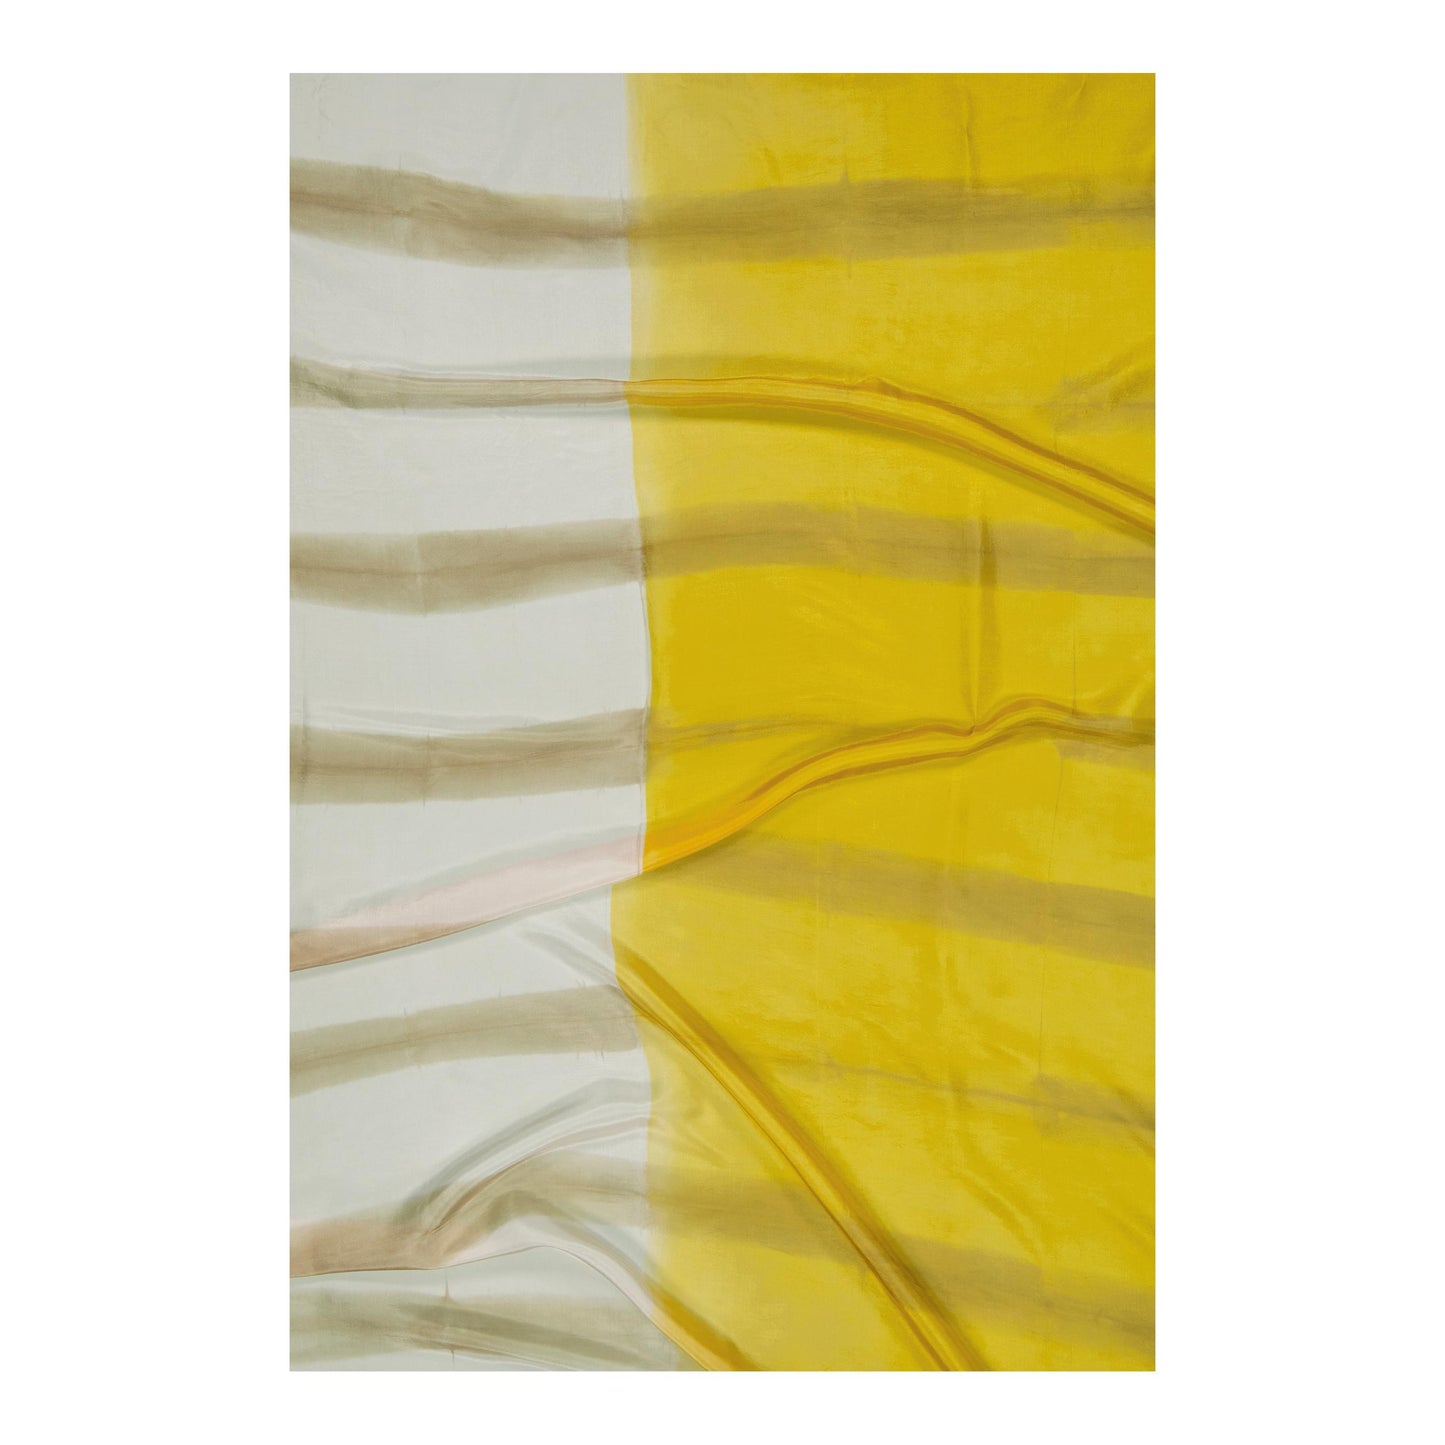 ITHAQUE - silk scarf YELLOW & BEIGE